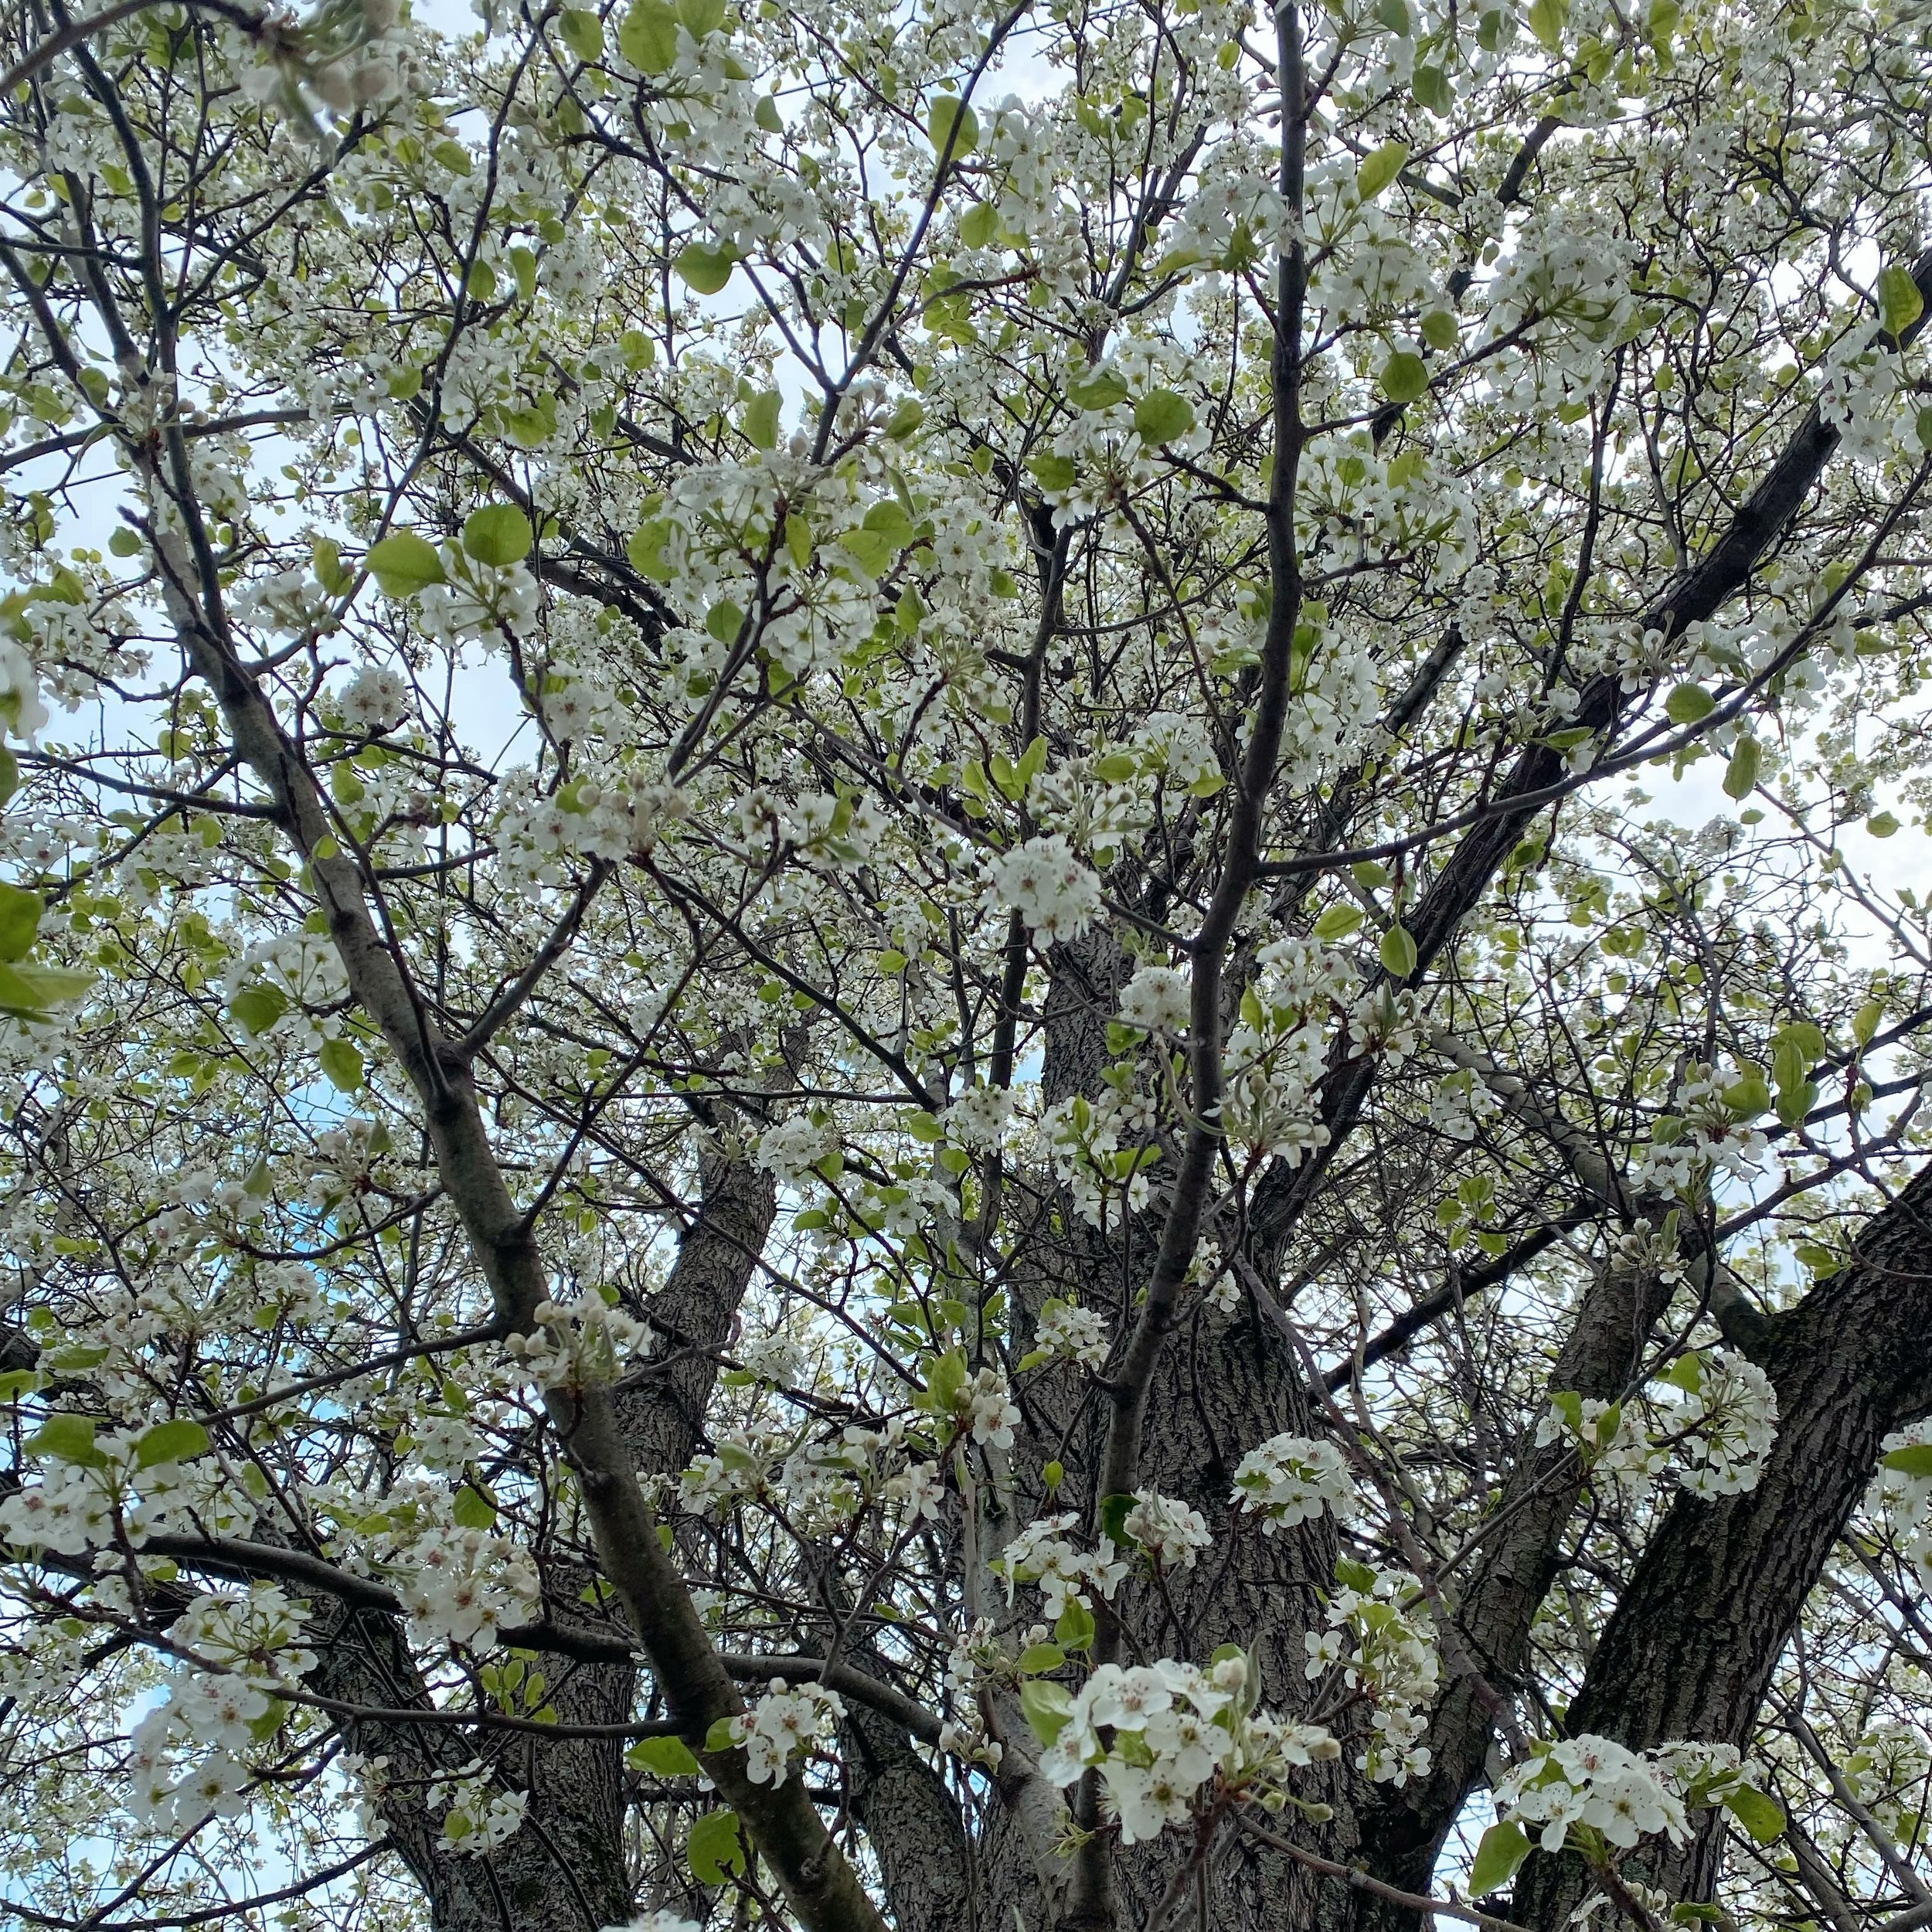 From a distance, this tree is really beautiful in the spring. But the closer you get the less pleasing it becomes. Until you are right up under it gagging at the smell and overwhelmed by the dissonance of how something so amazing could also be so awf